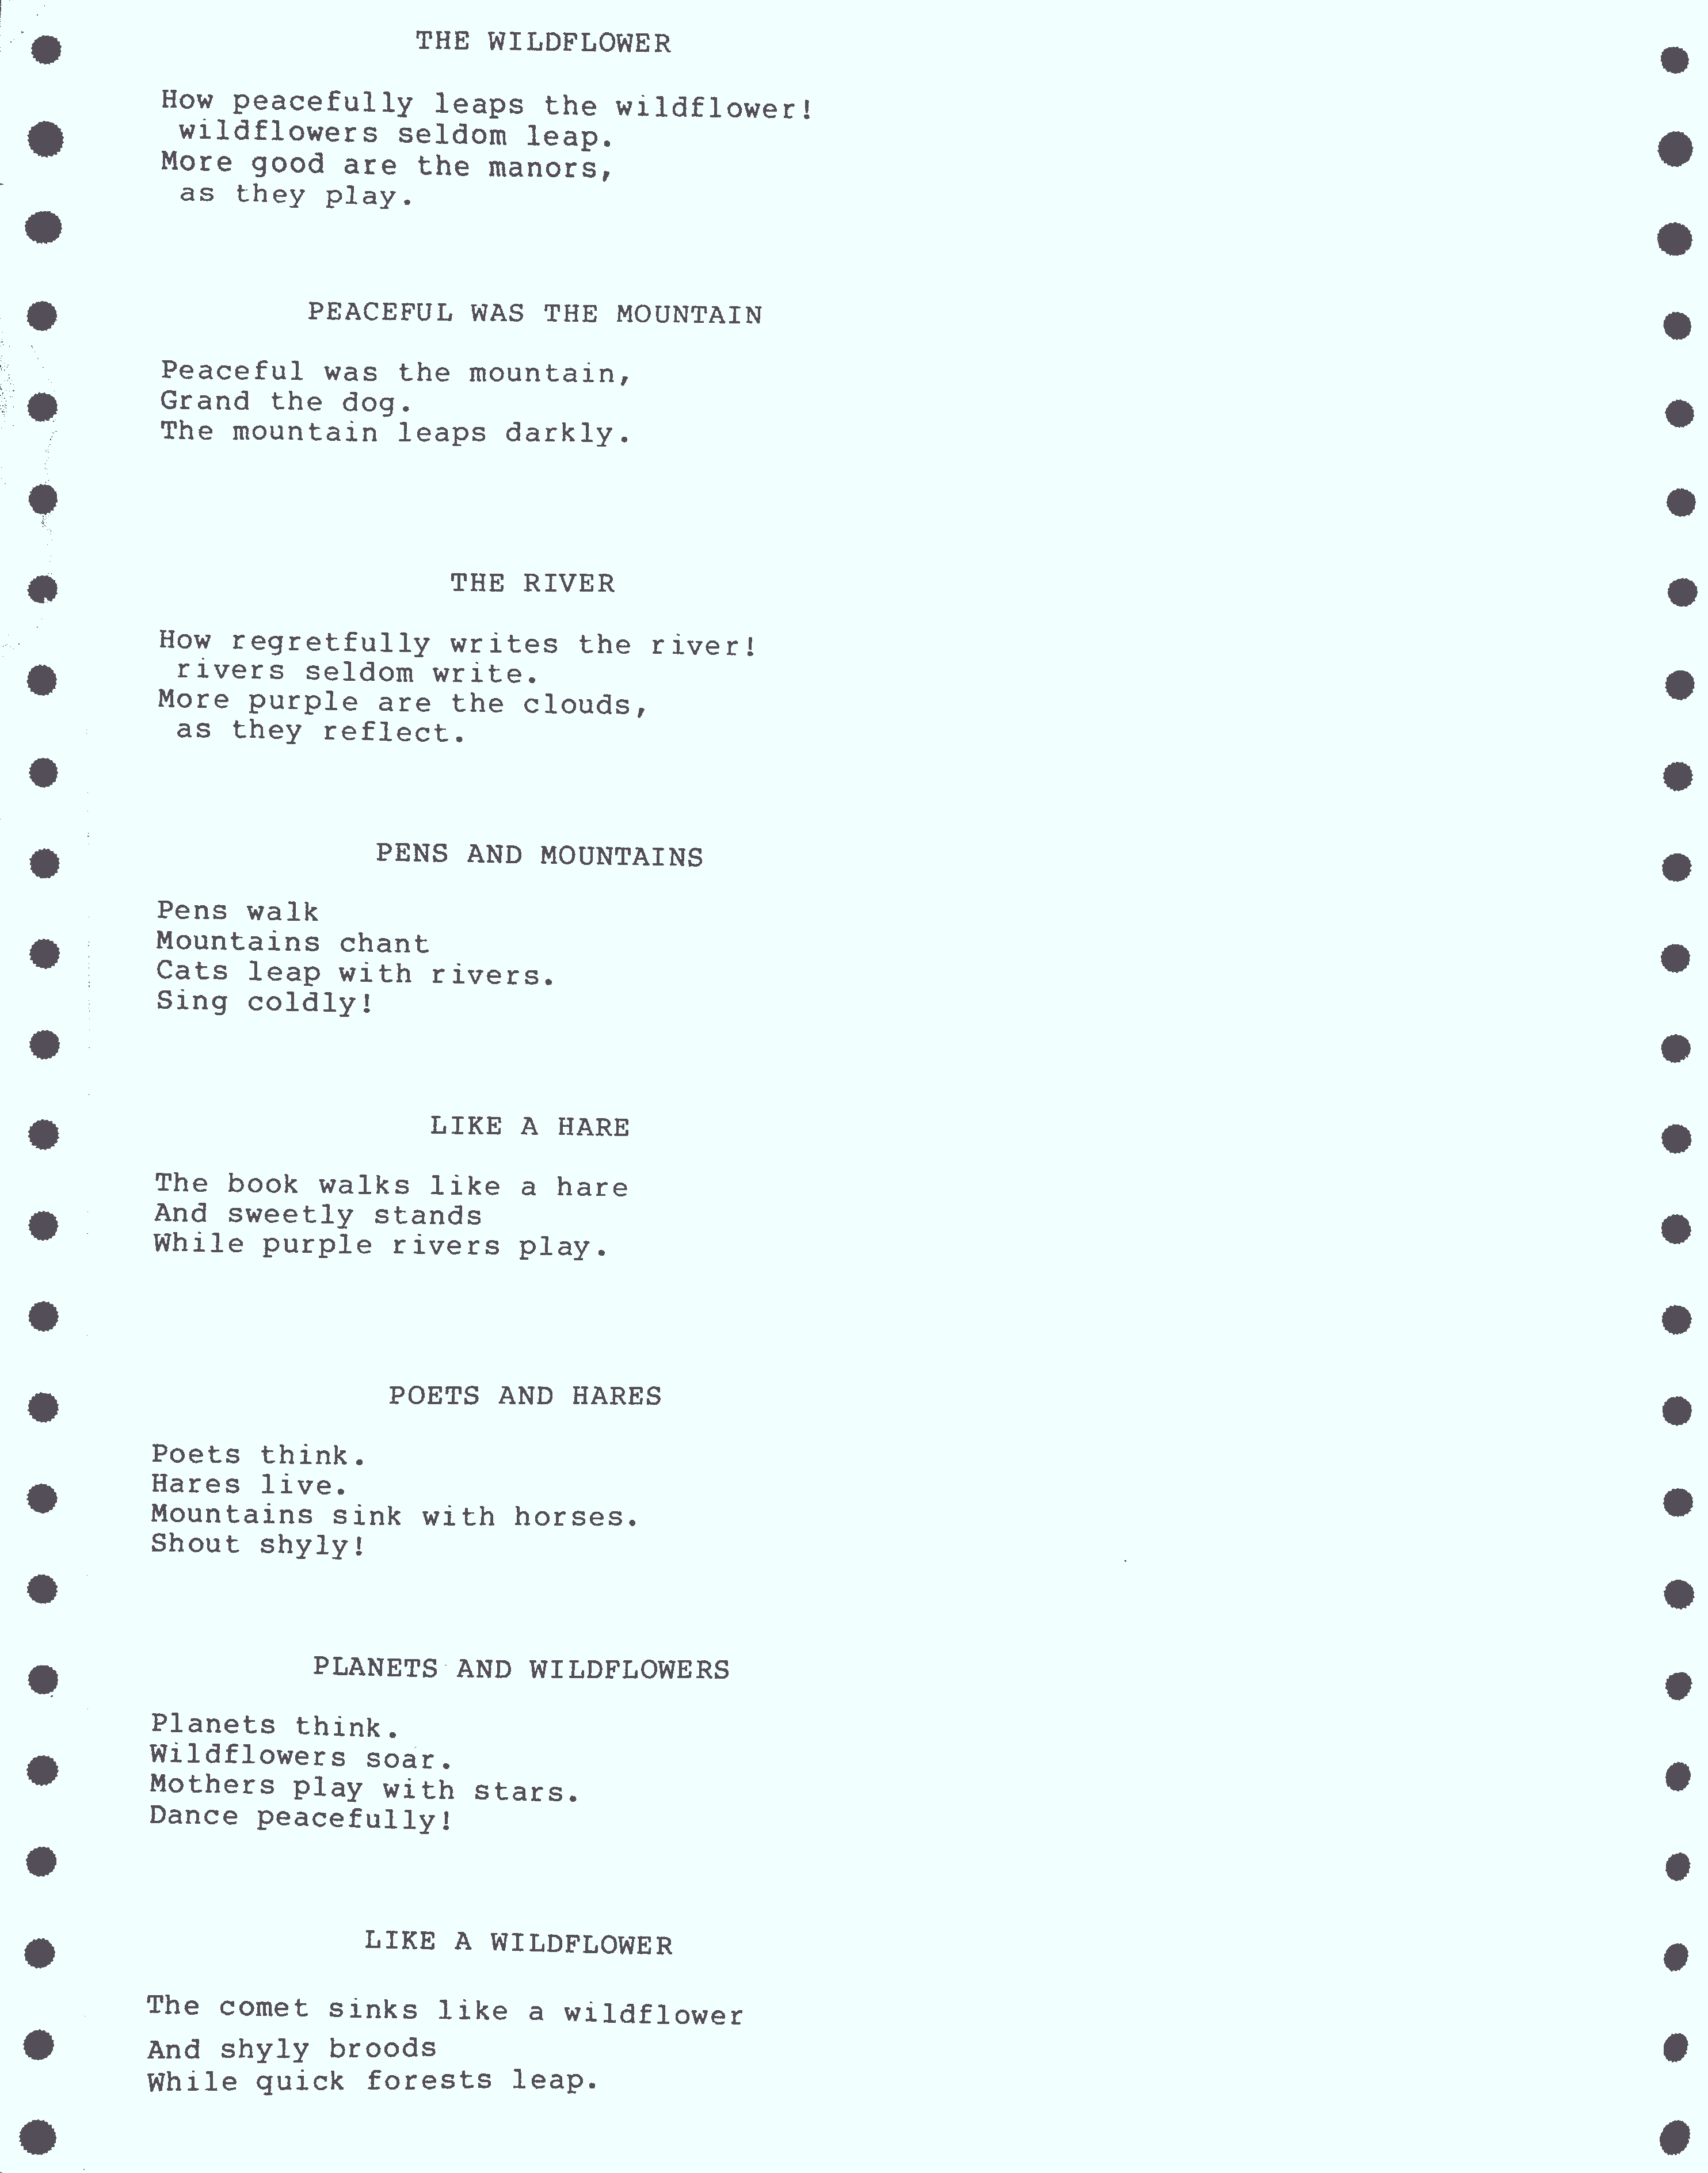 Like a poet: BASIC poetry: A selection of random poems from the TRS-80 Model 100.; poetry; TRS-80 Model 100; daisy wheel printers